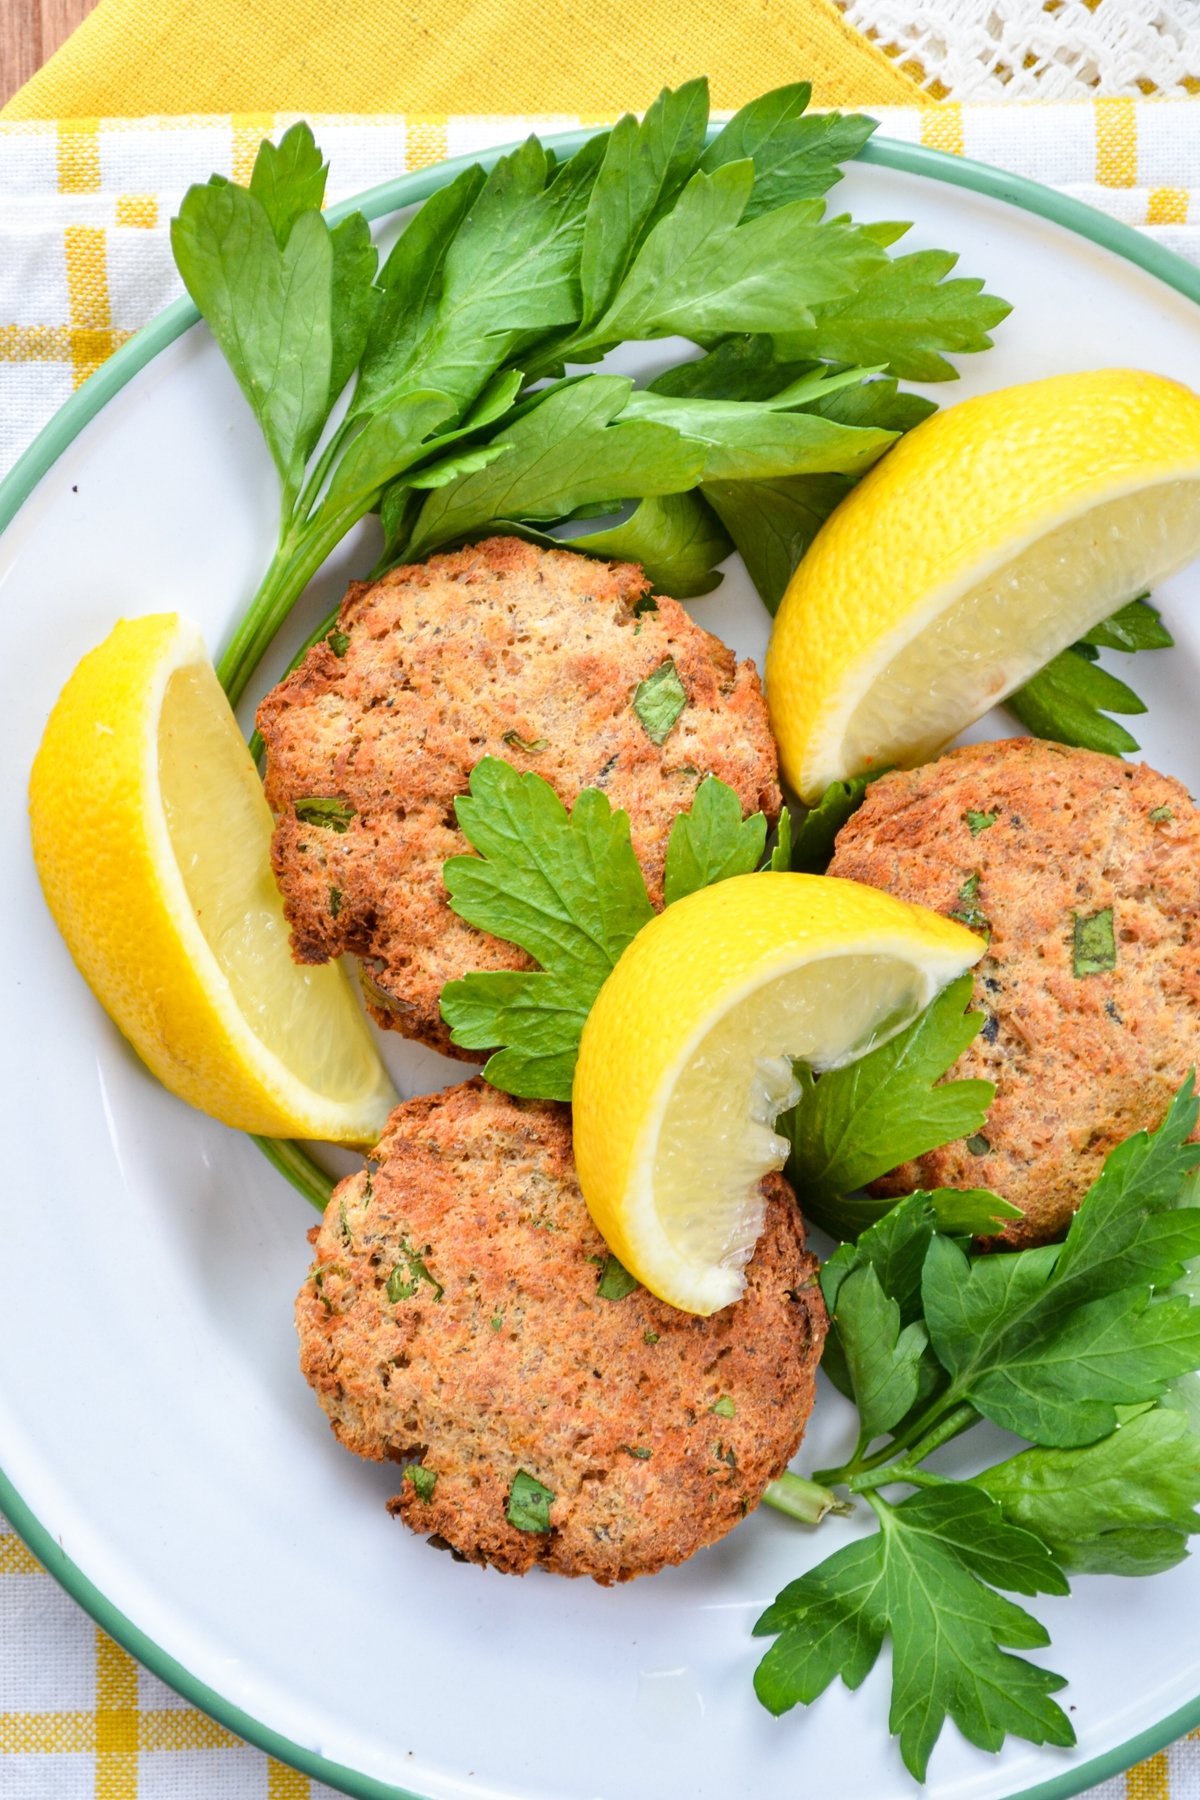 Salmon patties served on a plate, garnished with parsley and lemon.